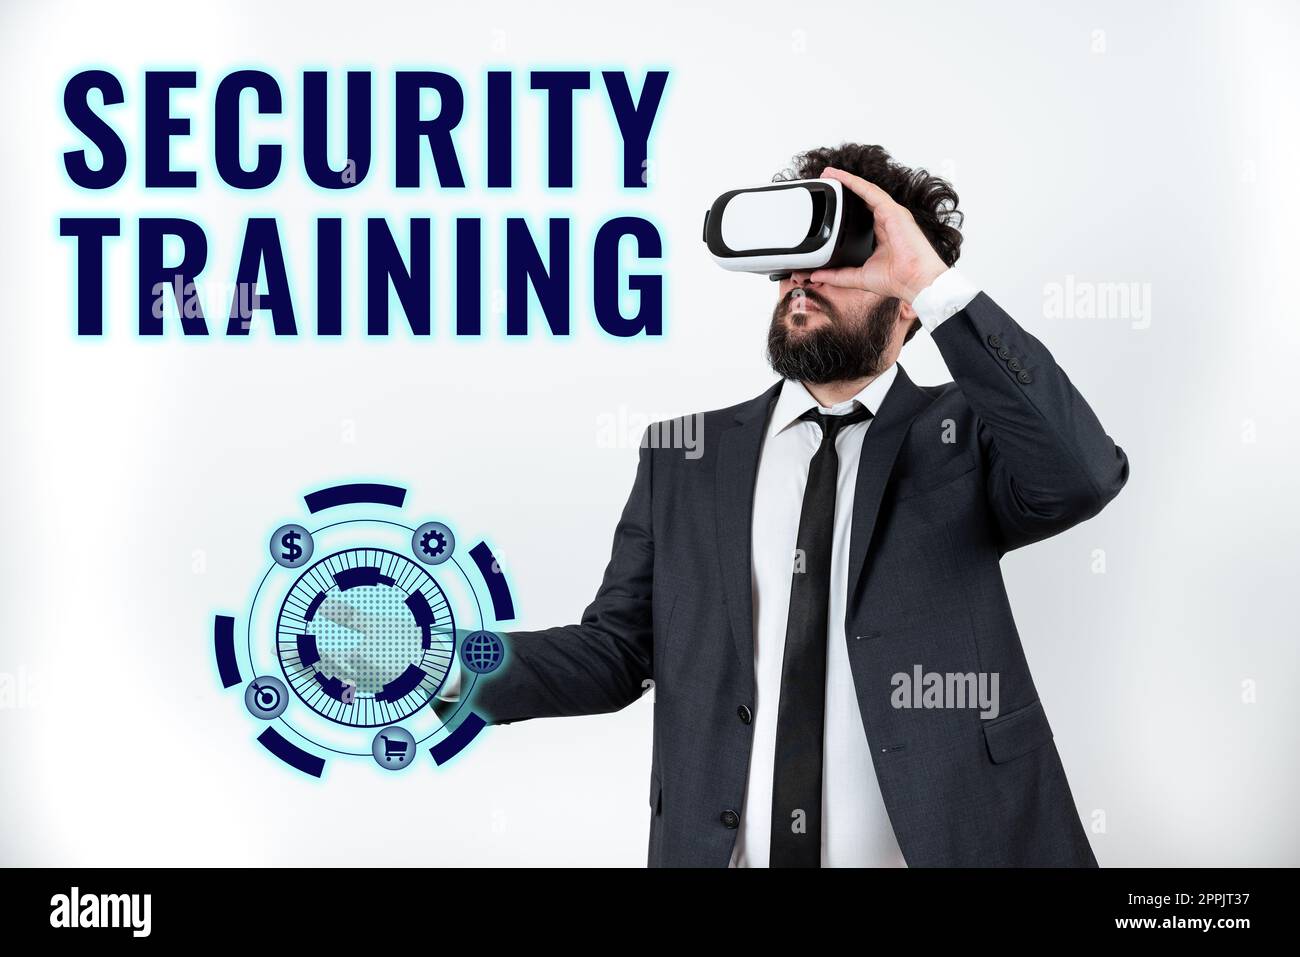 Text showing inspiration Security Training. Business showcase providing security awareness training for end users Stock Photo